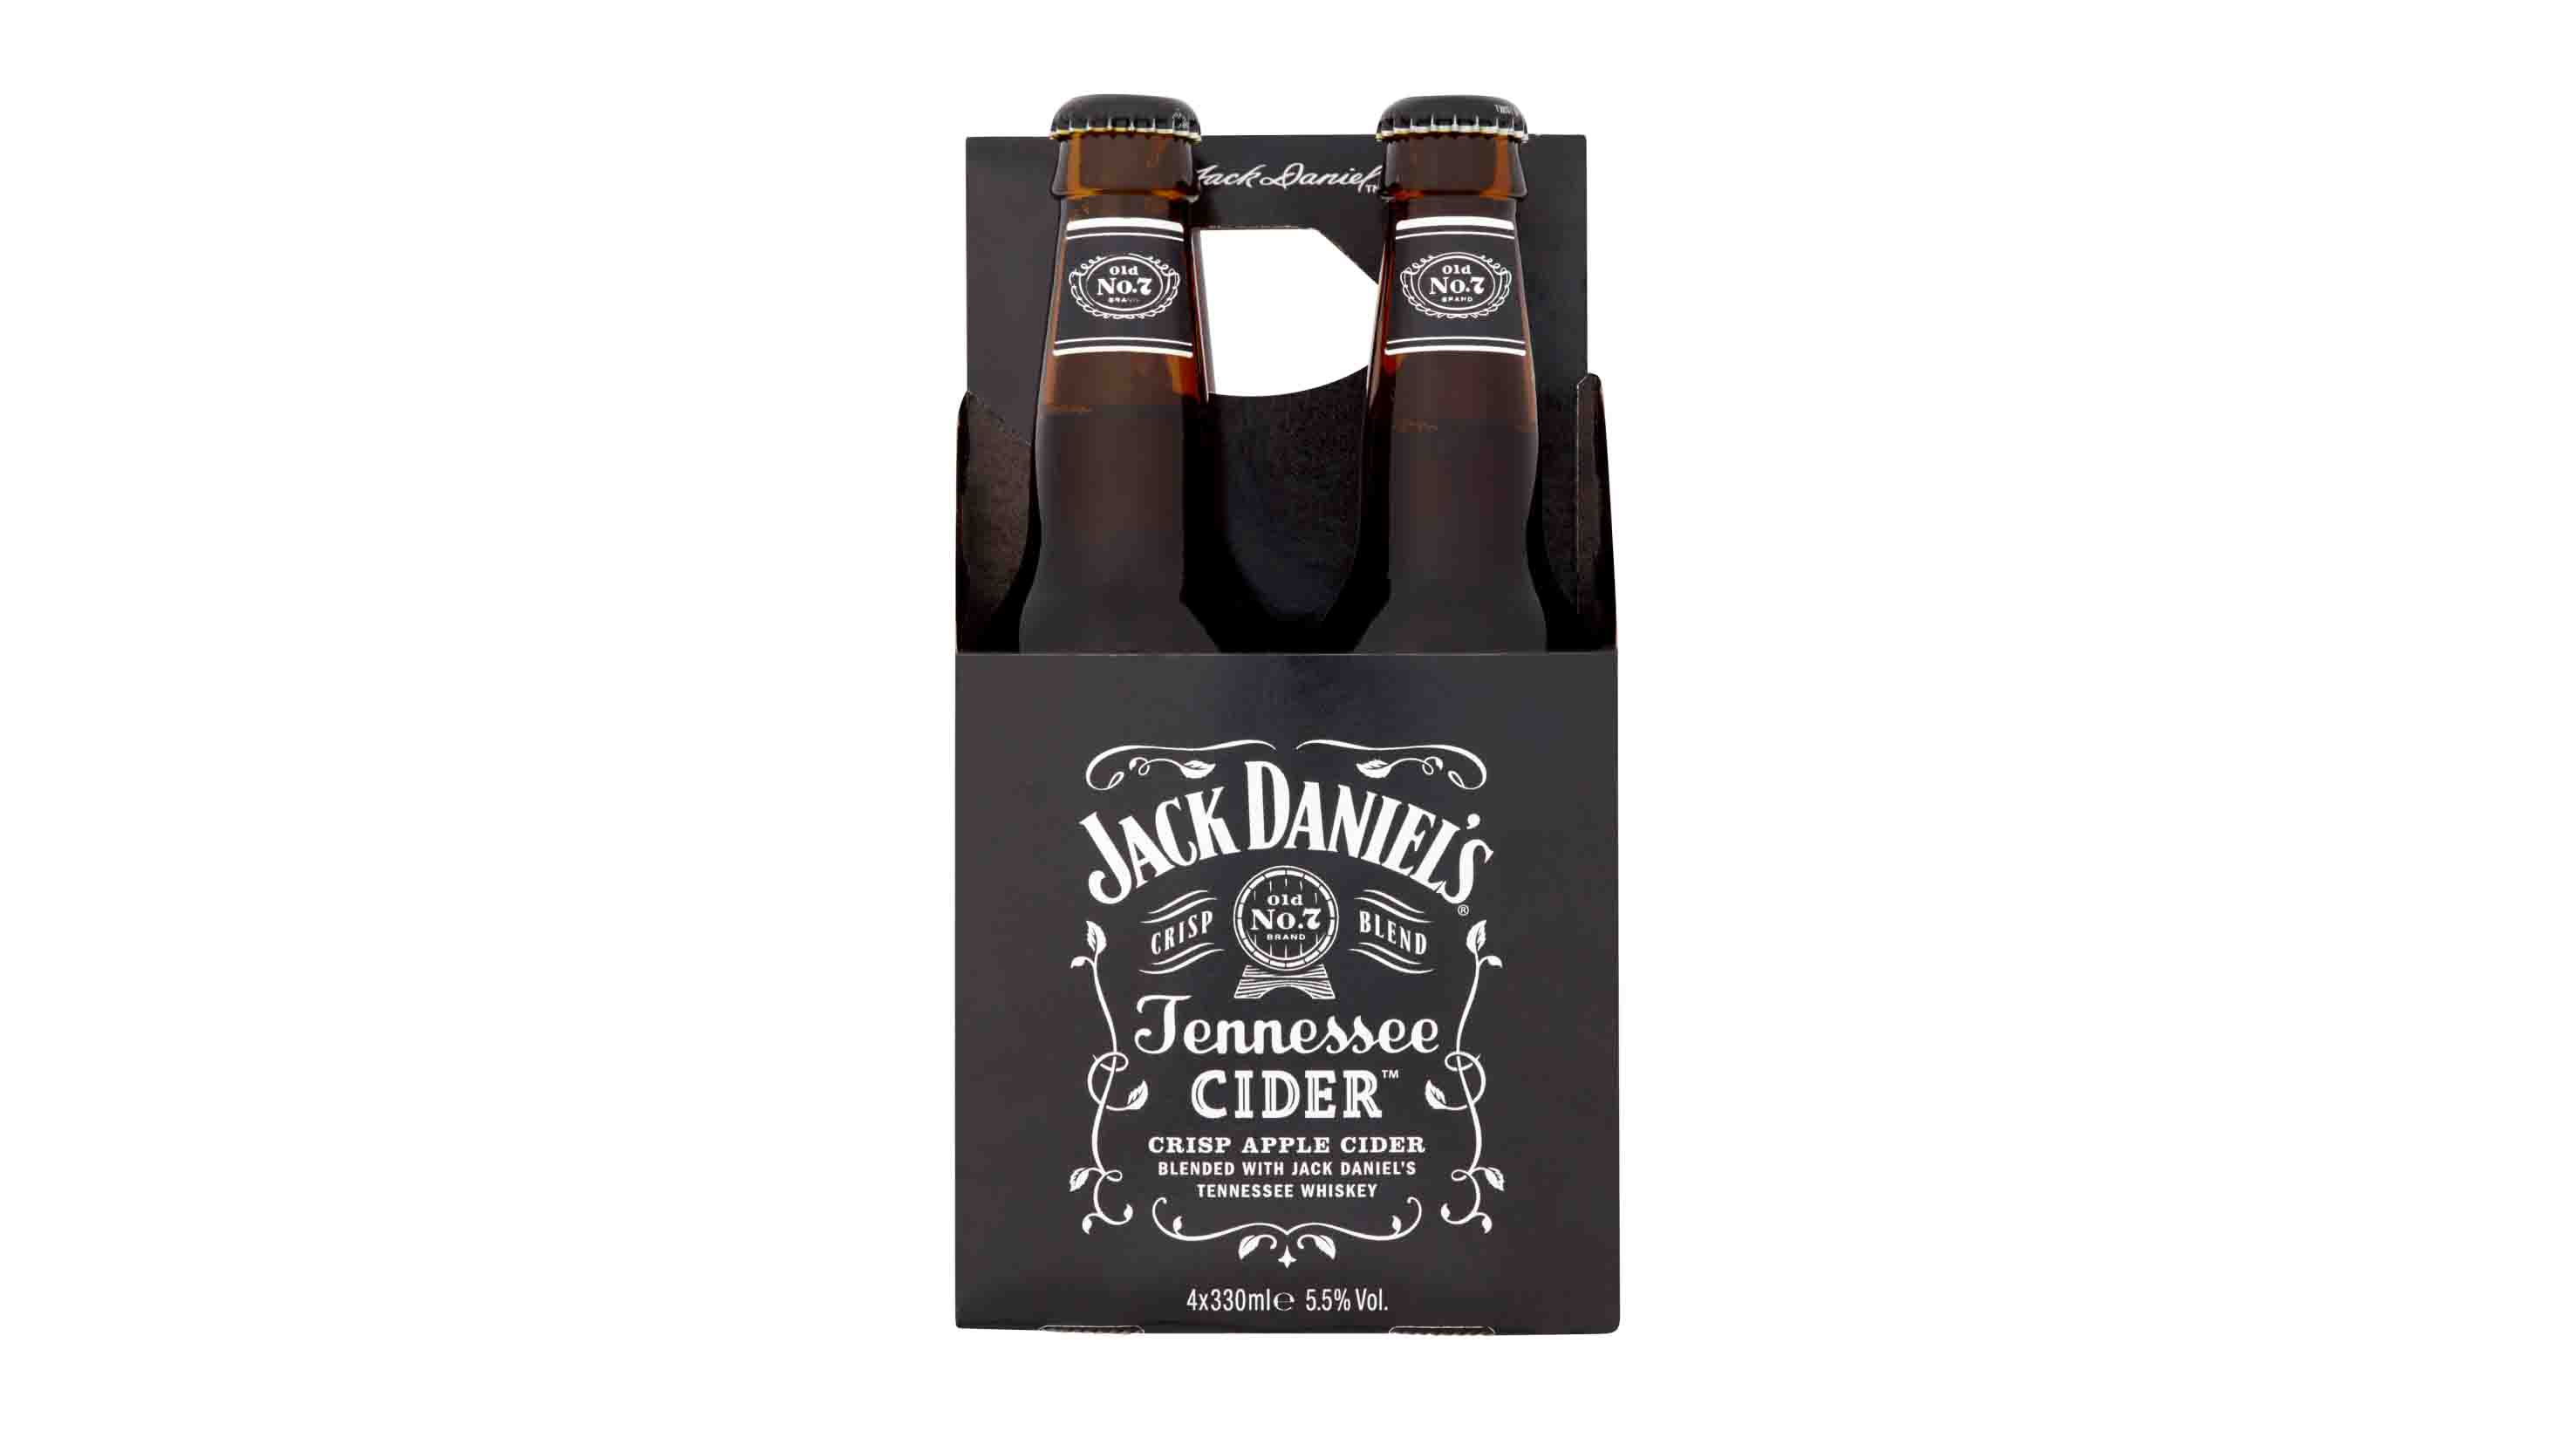 Ireland is only the second market in the world to get Jack Daniel’s Tennessee Cider. 